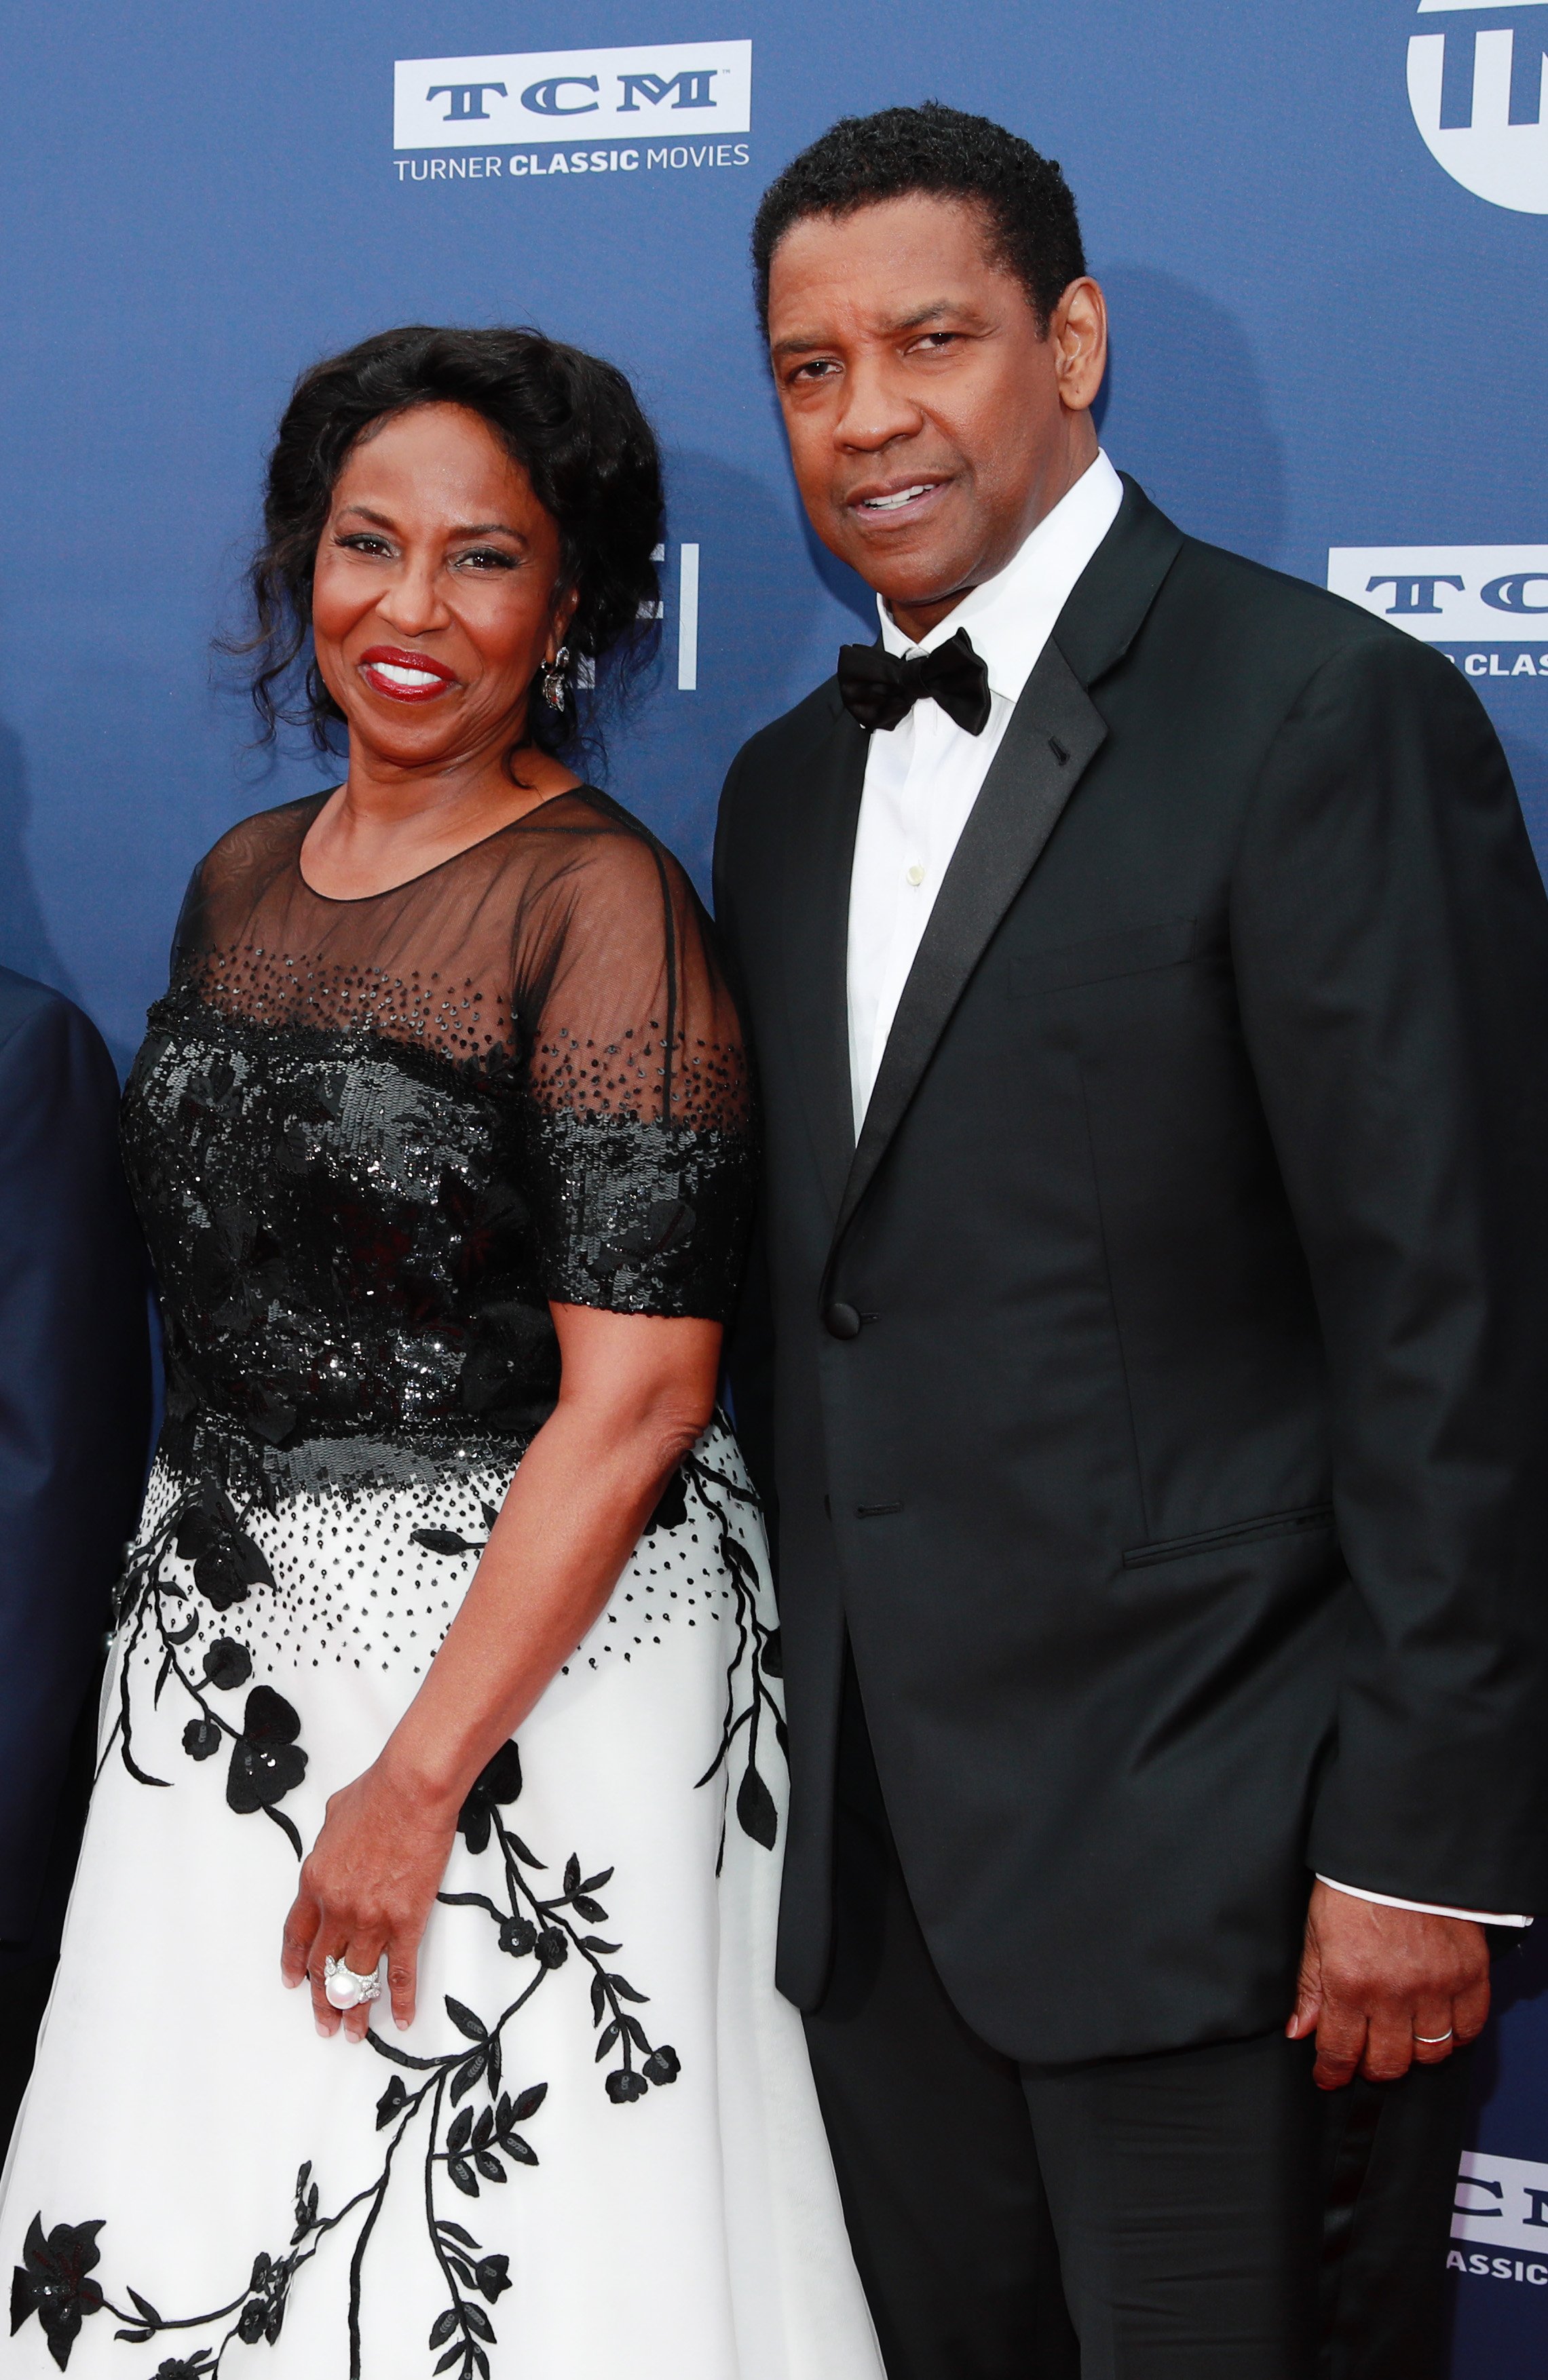 Pauletta Washington and Denzel Washington at the 47th AFI Life Achievement Award honoring Denzel Washington at Dolby Theatre on June 06, 2019 in Hollywood, California. | Source: Getty Images